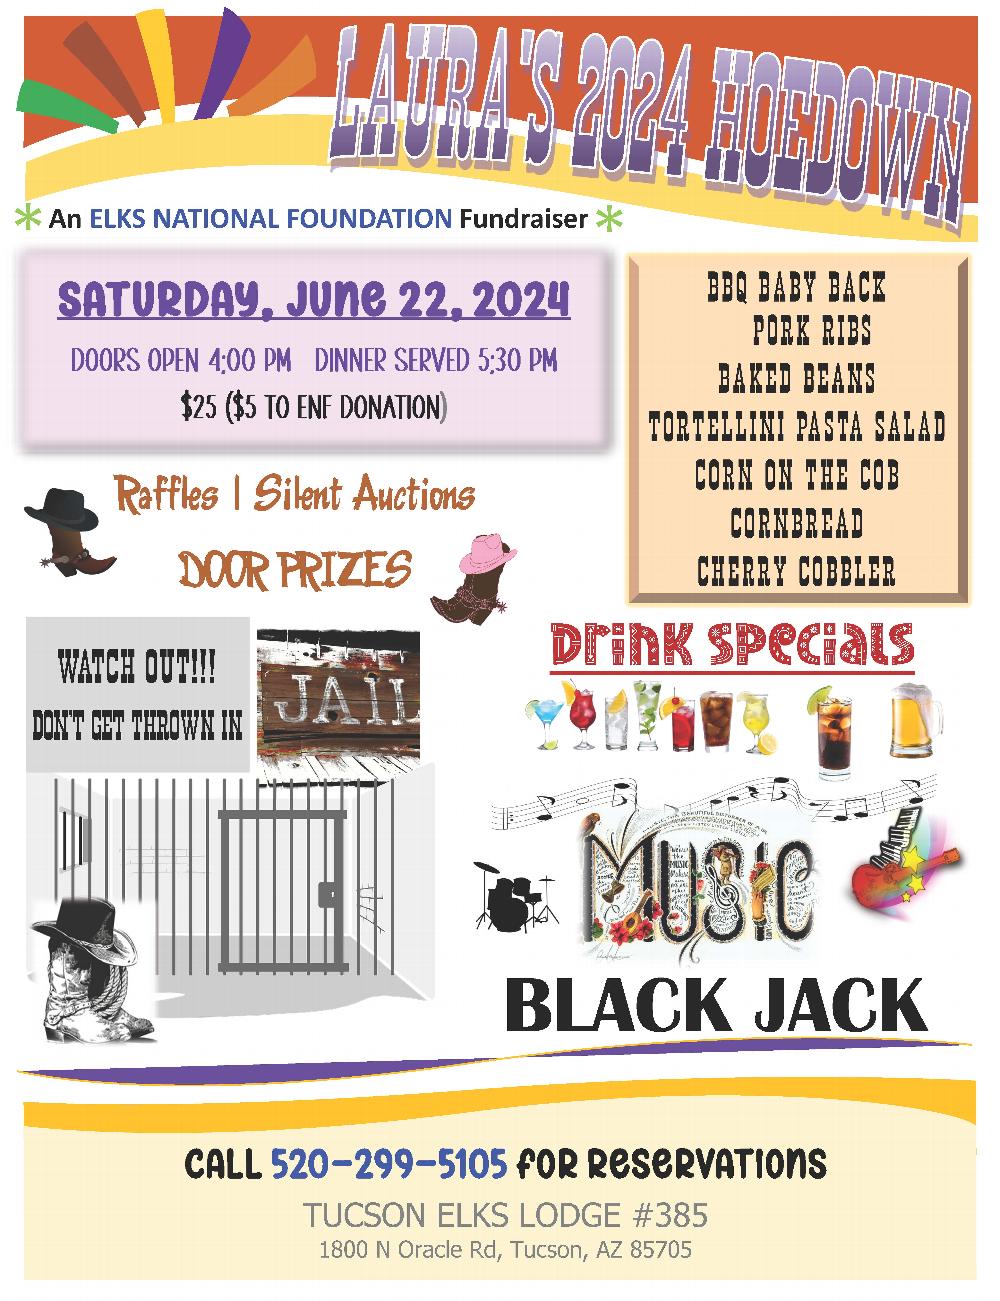 Please join Tucson AZ Lodge #385 for Laura's annual Elks National Foundation (ENF) fundraiser.  Great people, food and music.    June 22, 2024